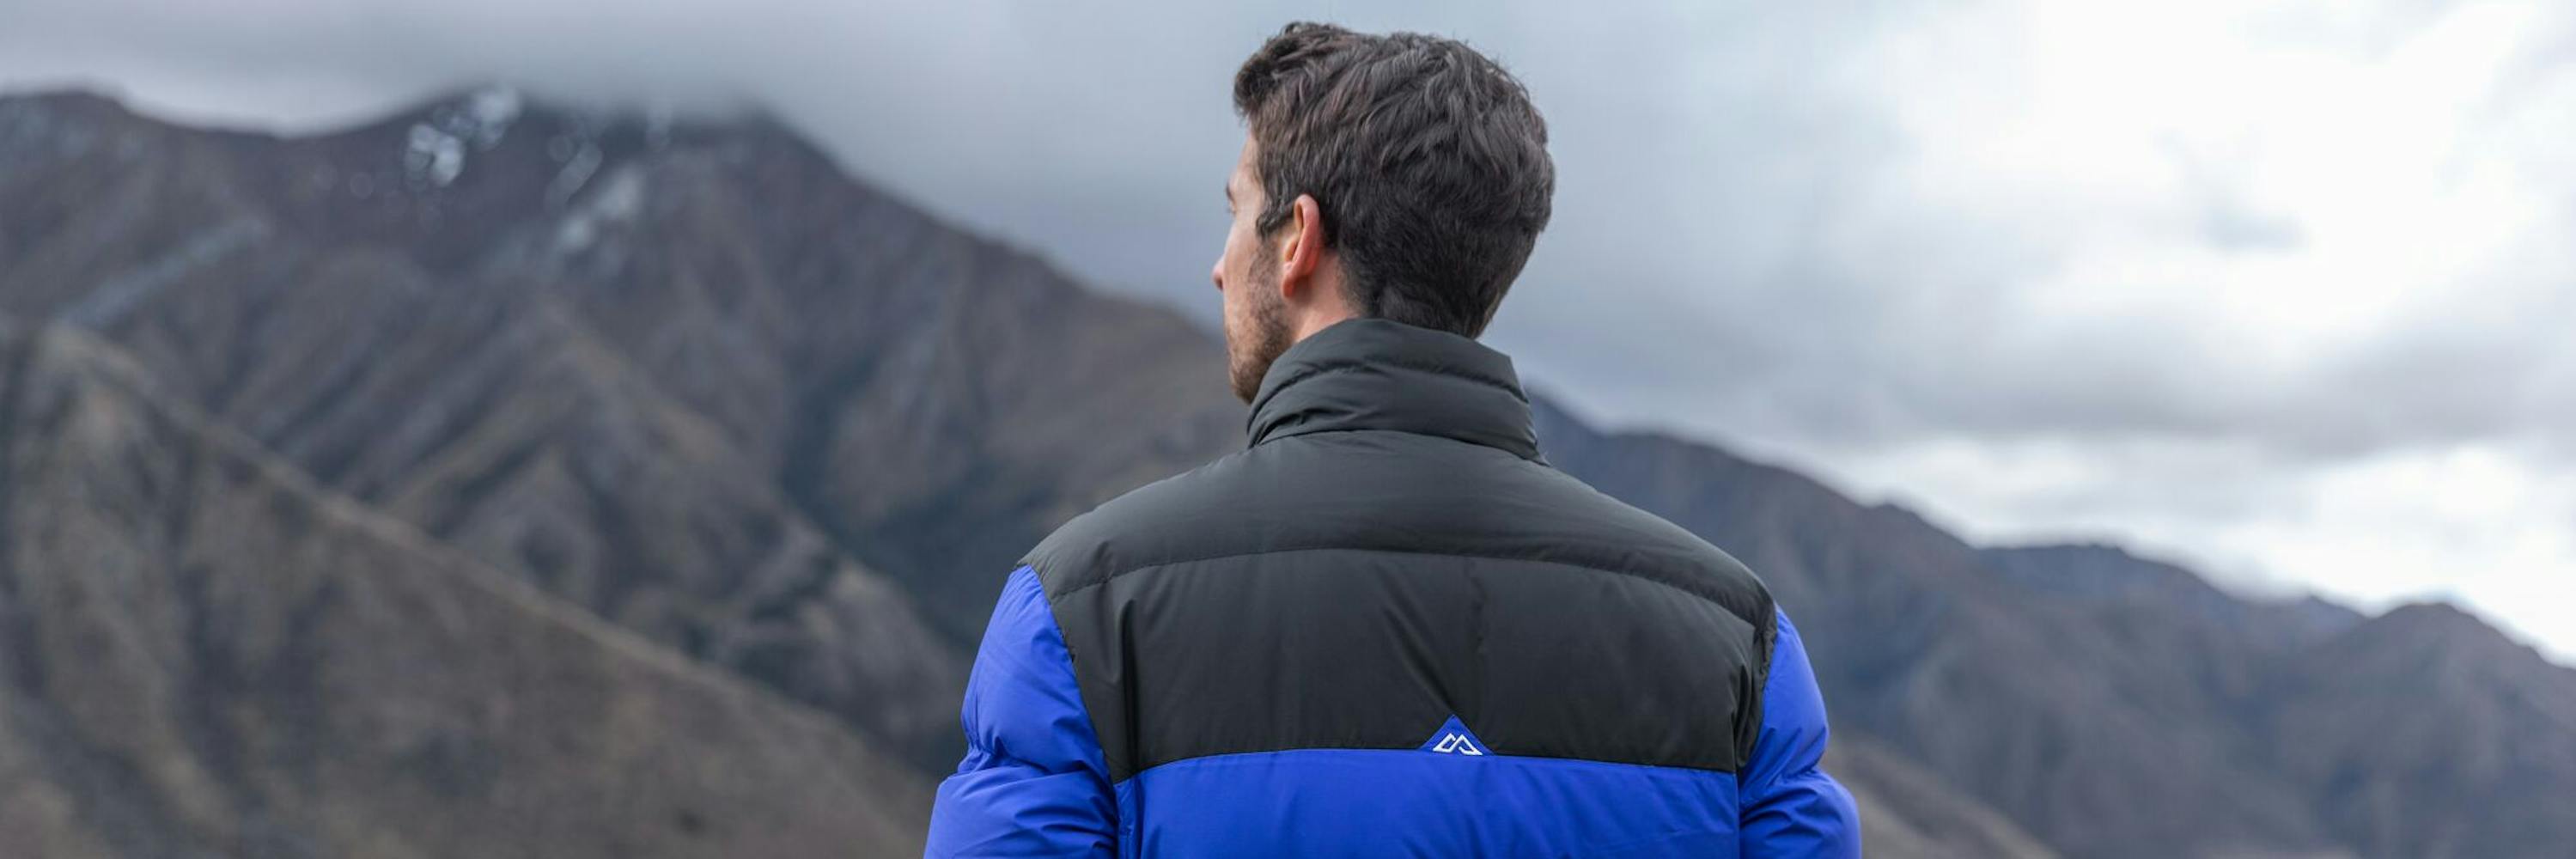 Repair Story: Easy Self-Adhesive Patch Fixes a Favorite Puffer Jacket